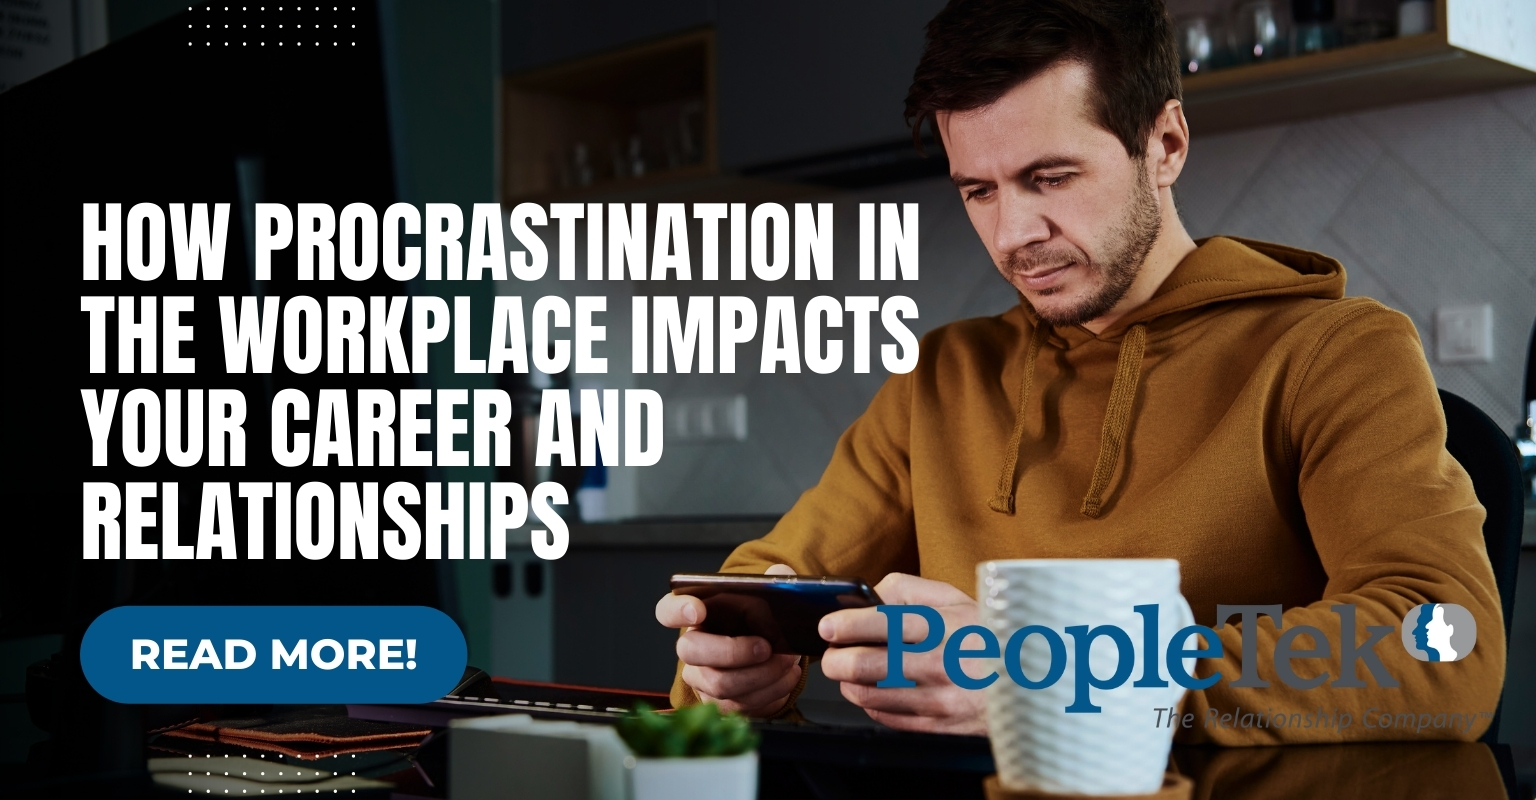 How Procrastination in the Workplace Impacts Your Career and Relationships